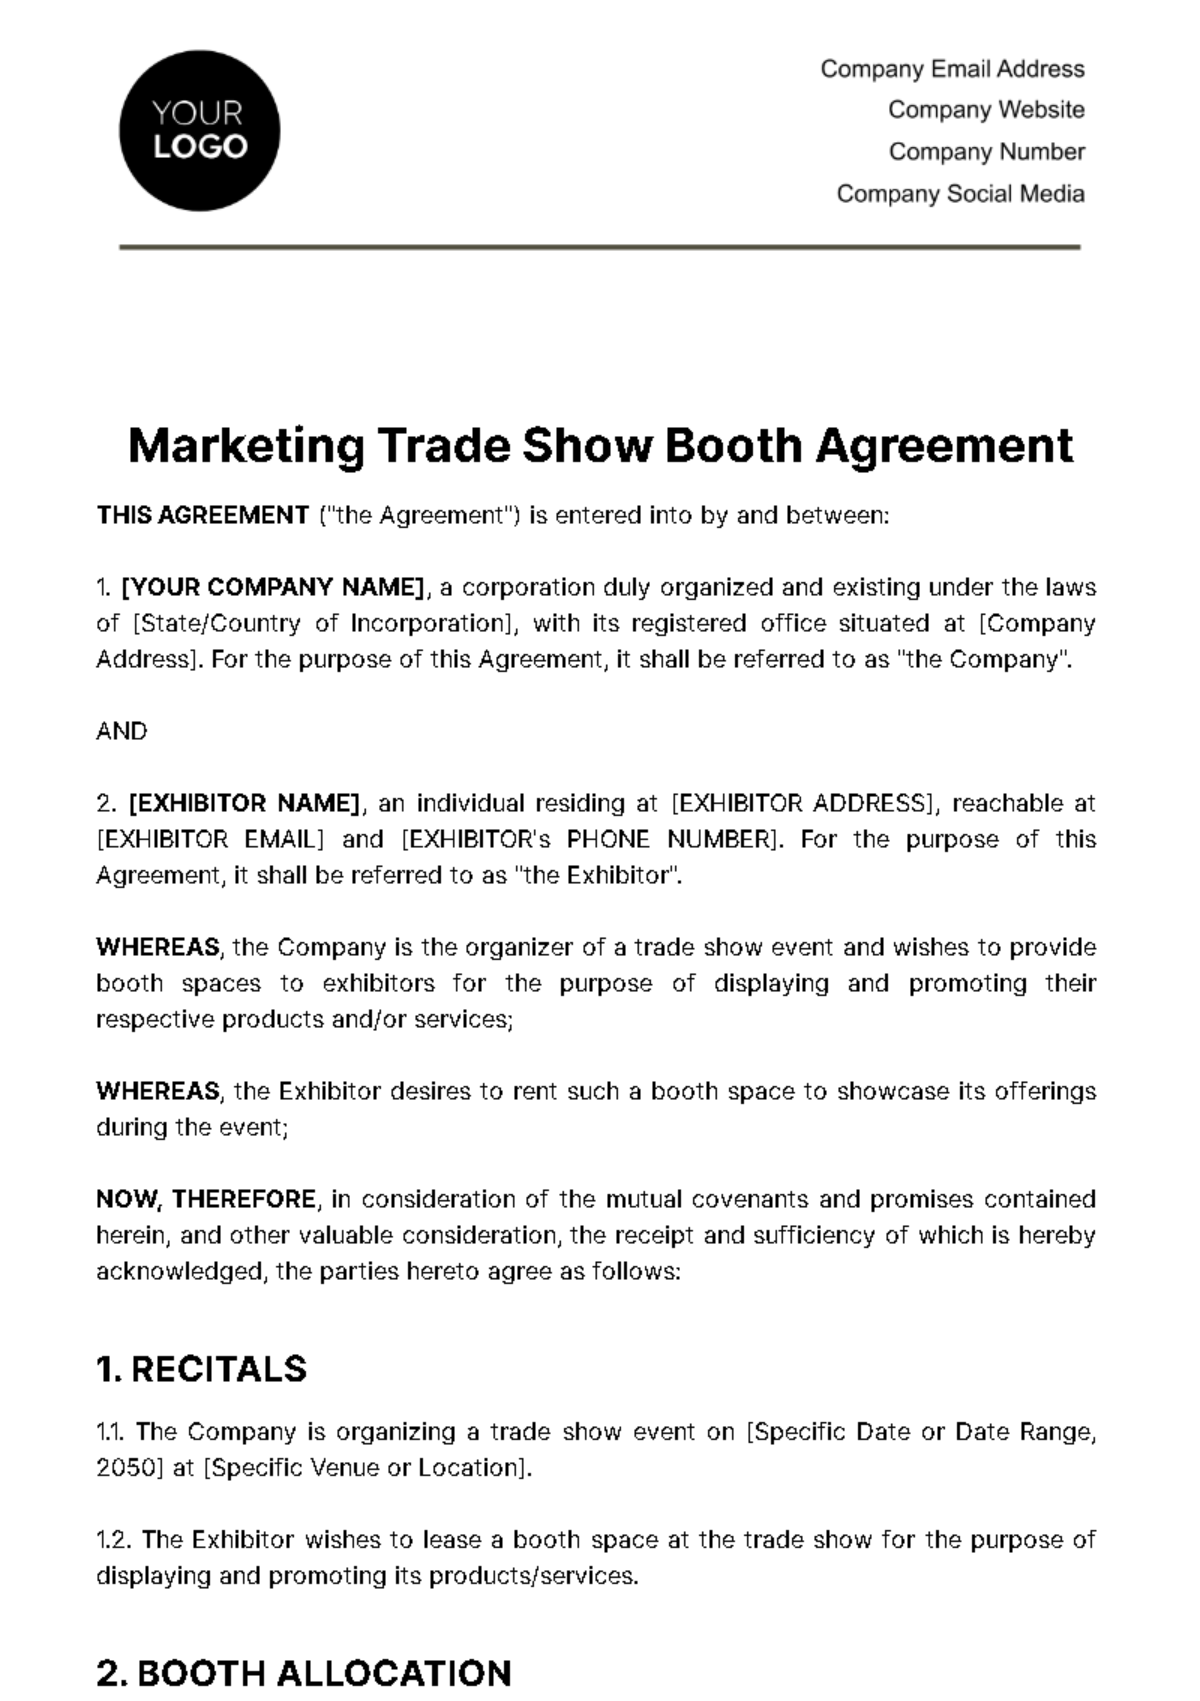 Marketing Trade Show Booth Agreement Template